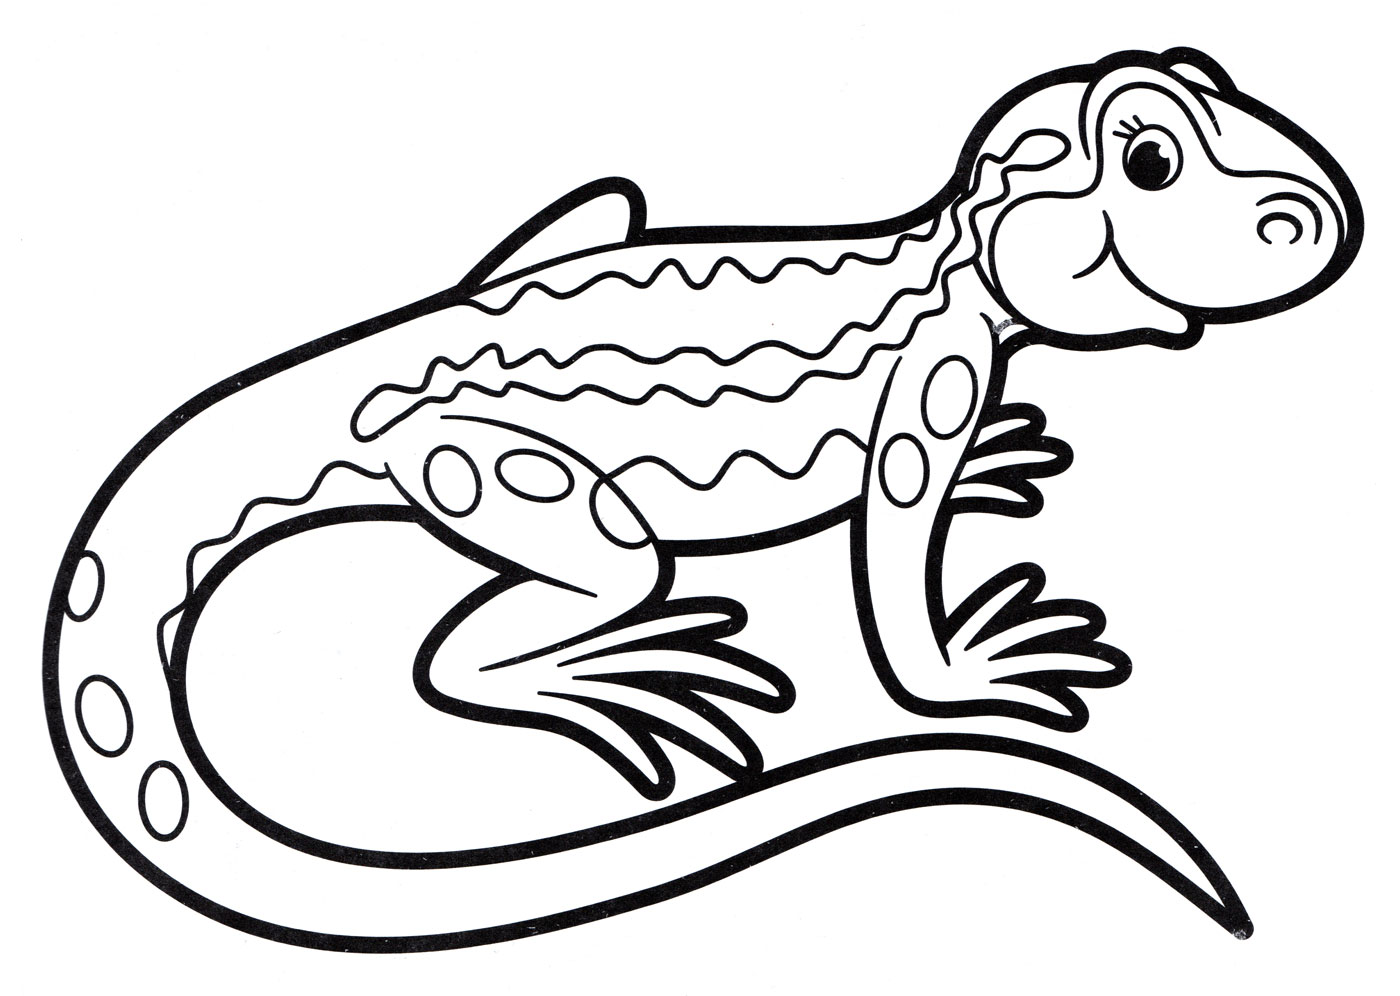 Lizard Coloring Pages to download and print for free